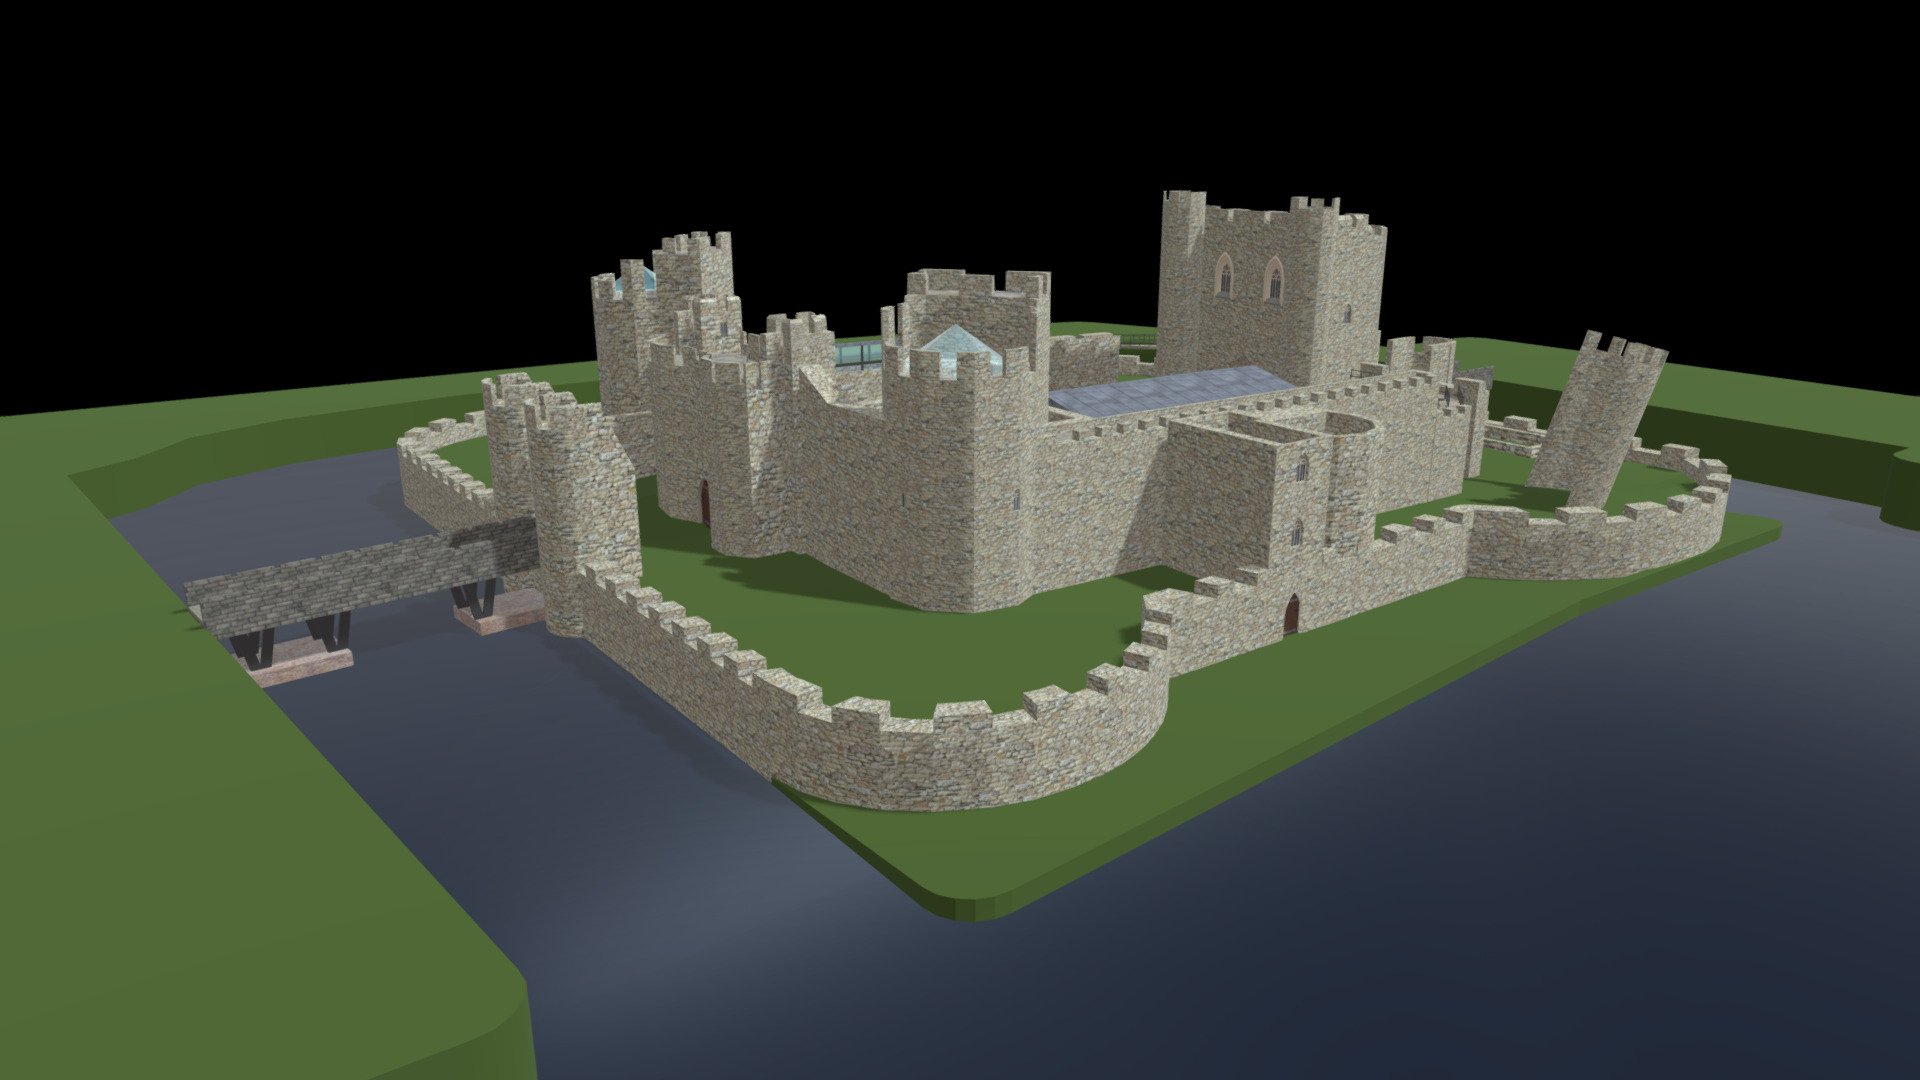 Caerphilly Castle Castles Of Wales, 49% OFF